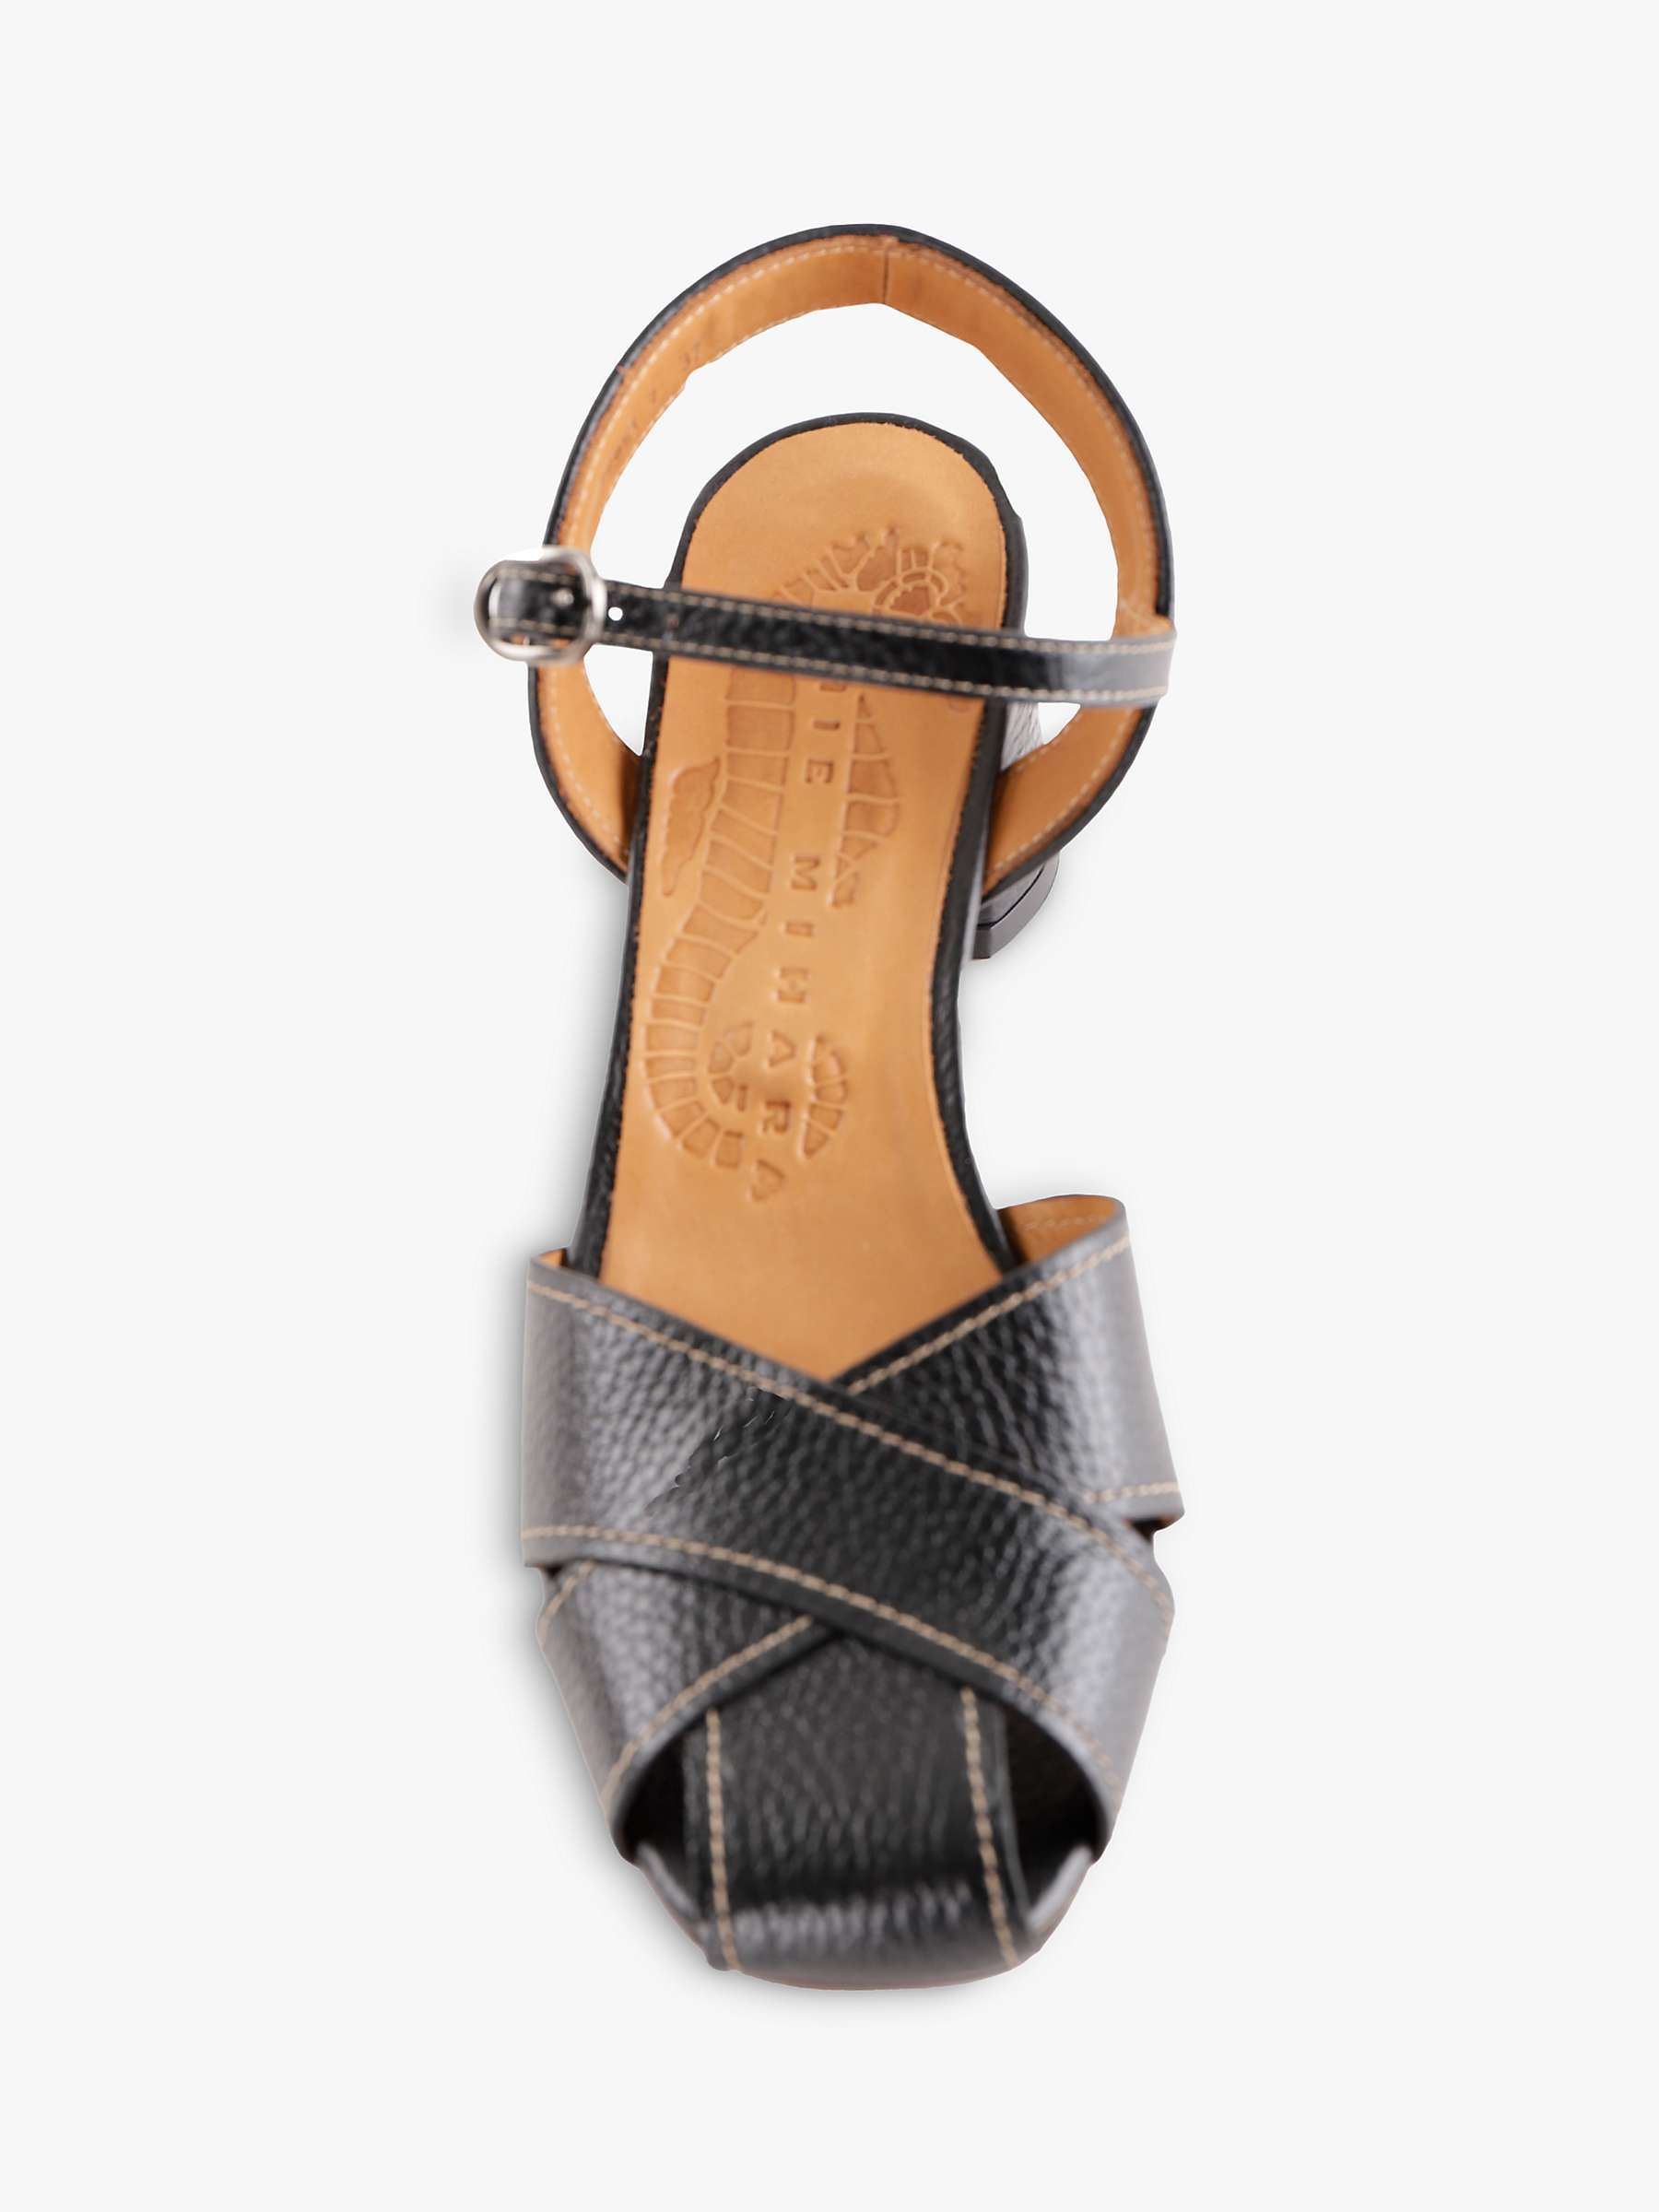 Buy Chie Mihara Roley Leather Sandals, Black Online at johnlewis.com